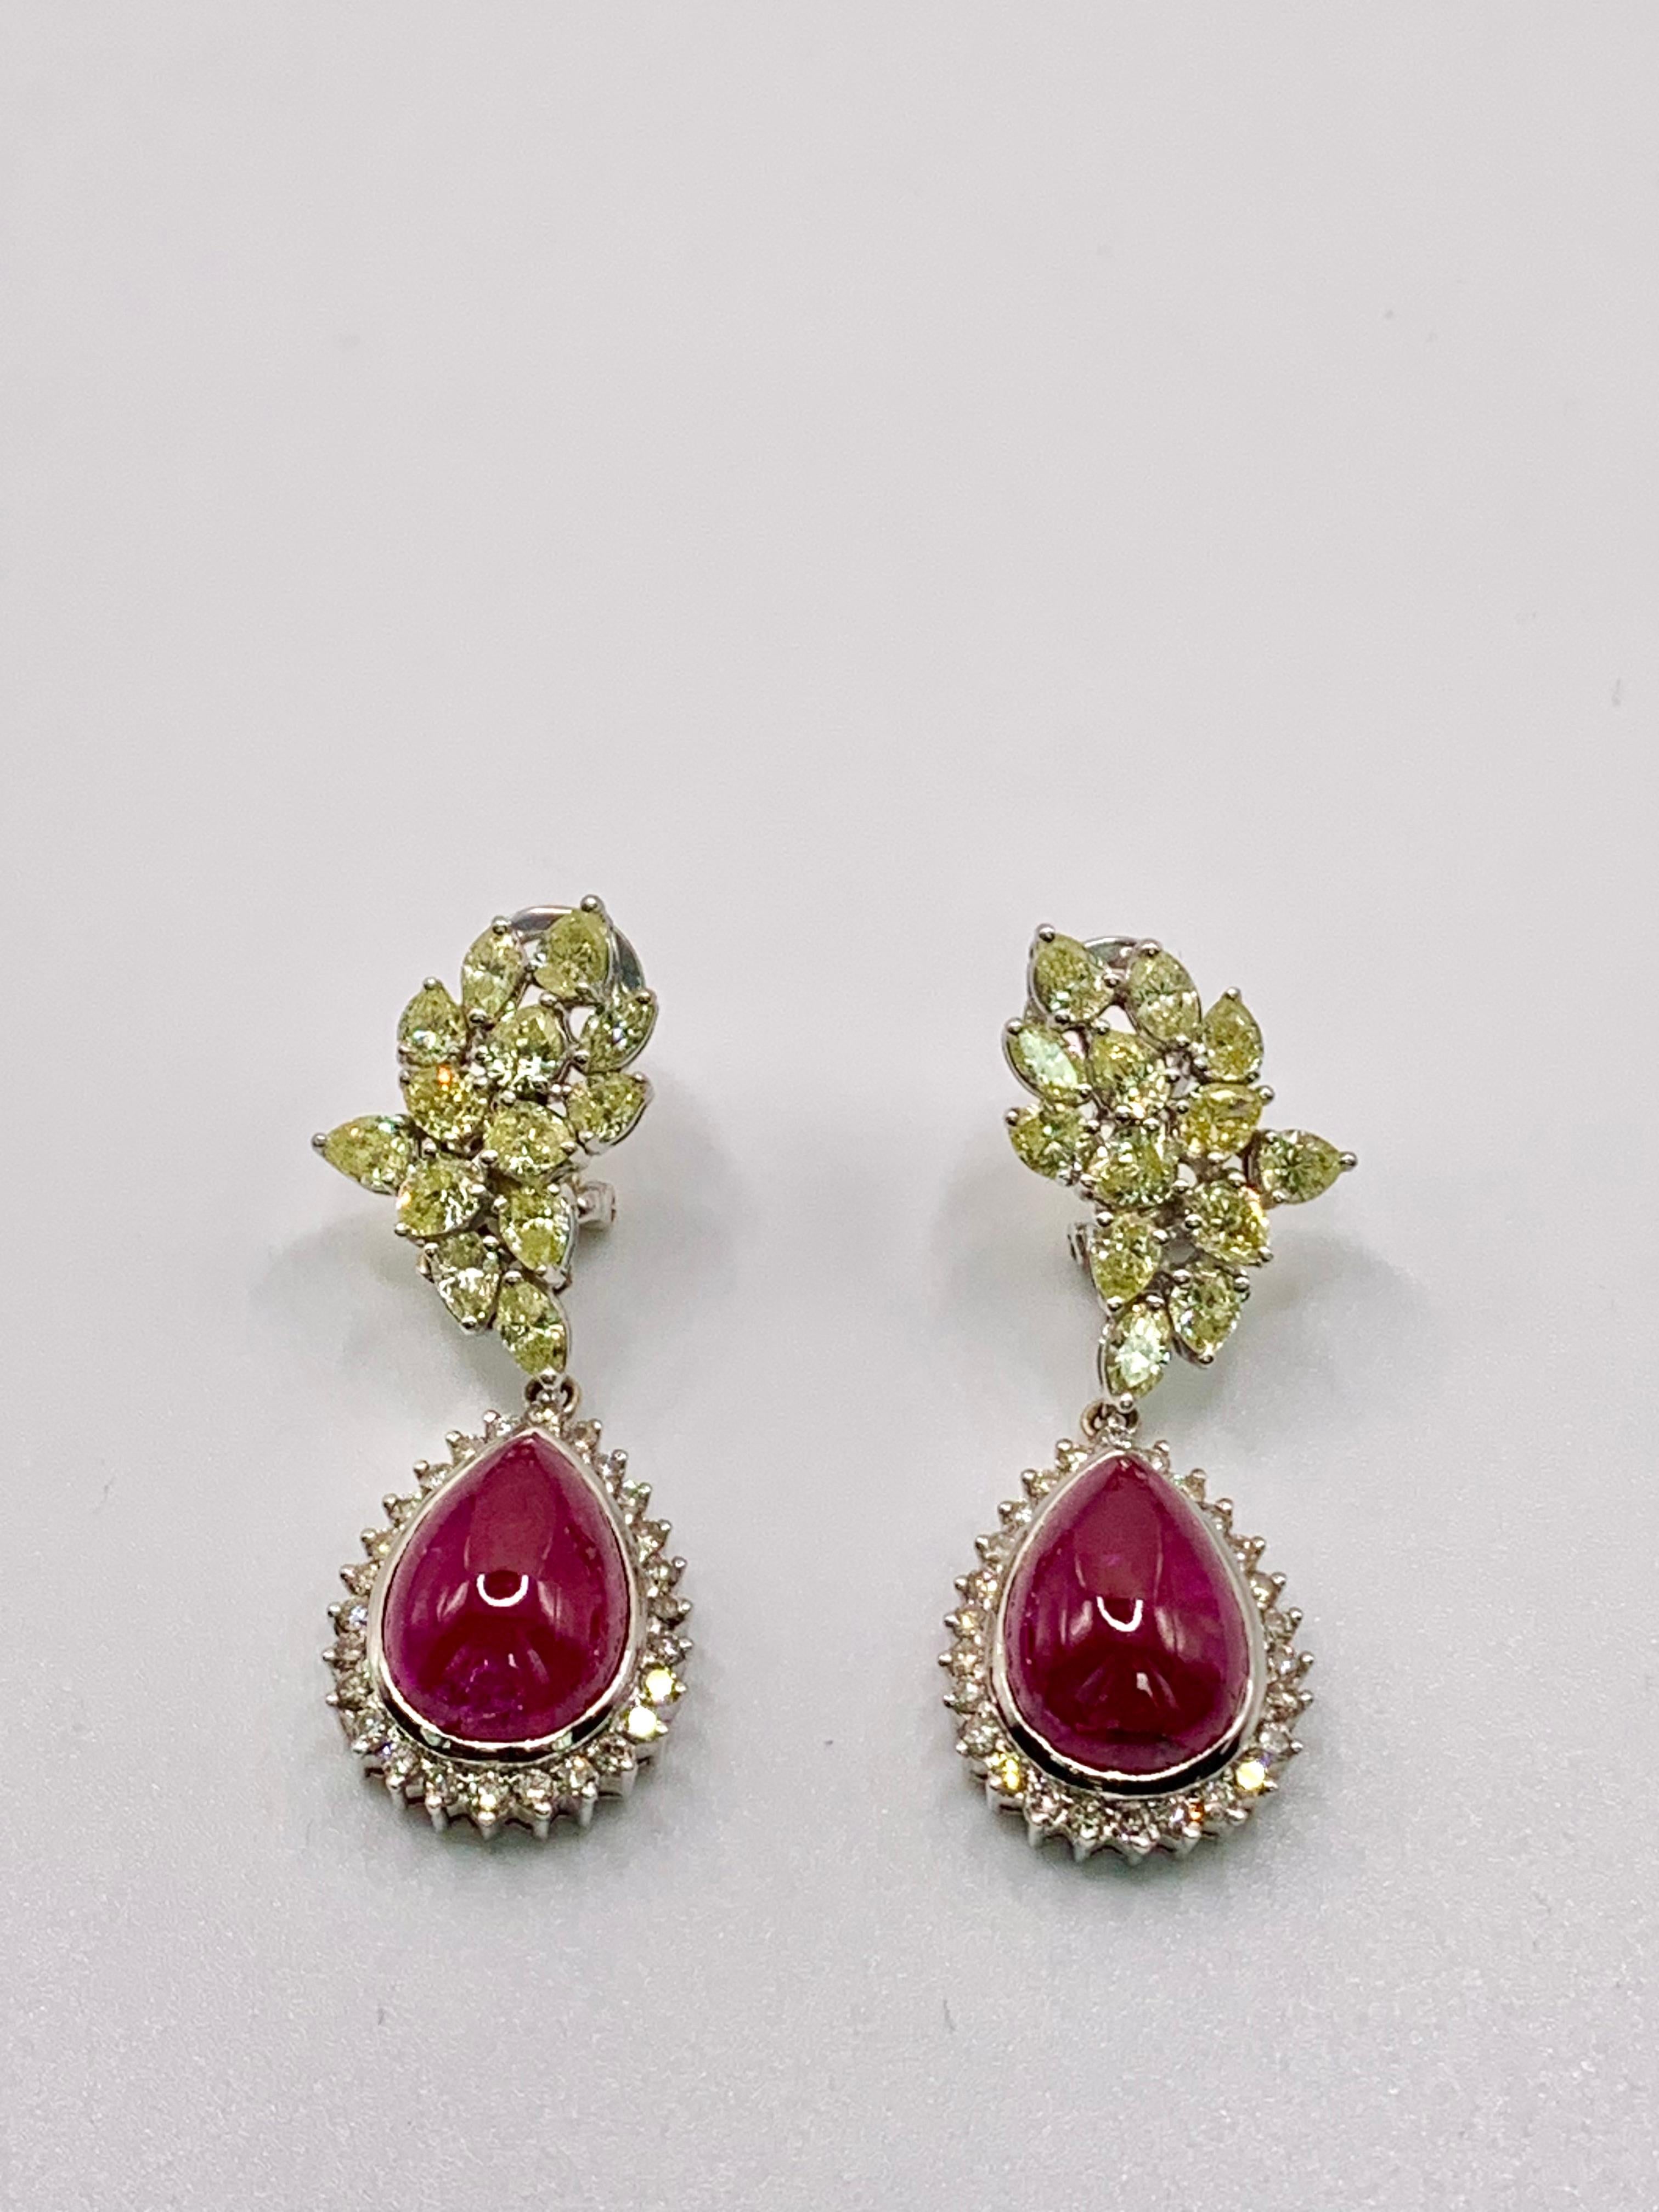 Modern classic style long earrings with pear-cabochon cut Burma rubies and light yellow diamonds and a border of brilliant-cut white diamonds.Made 18K white gold. Demountable.

Product Details
↣ Jewelry Type - Earrings
↣ Style - Modern classic
↣